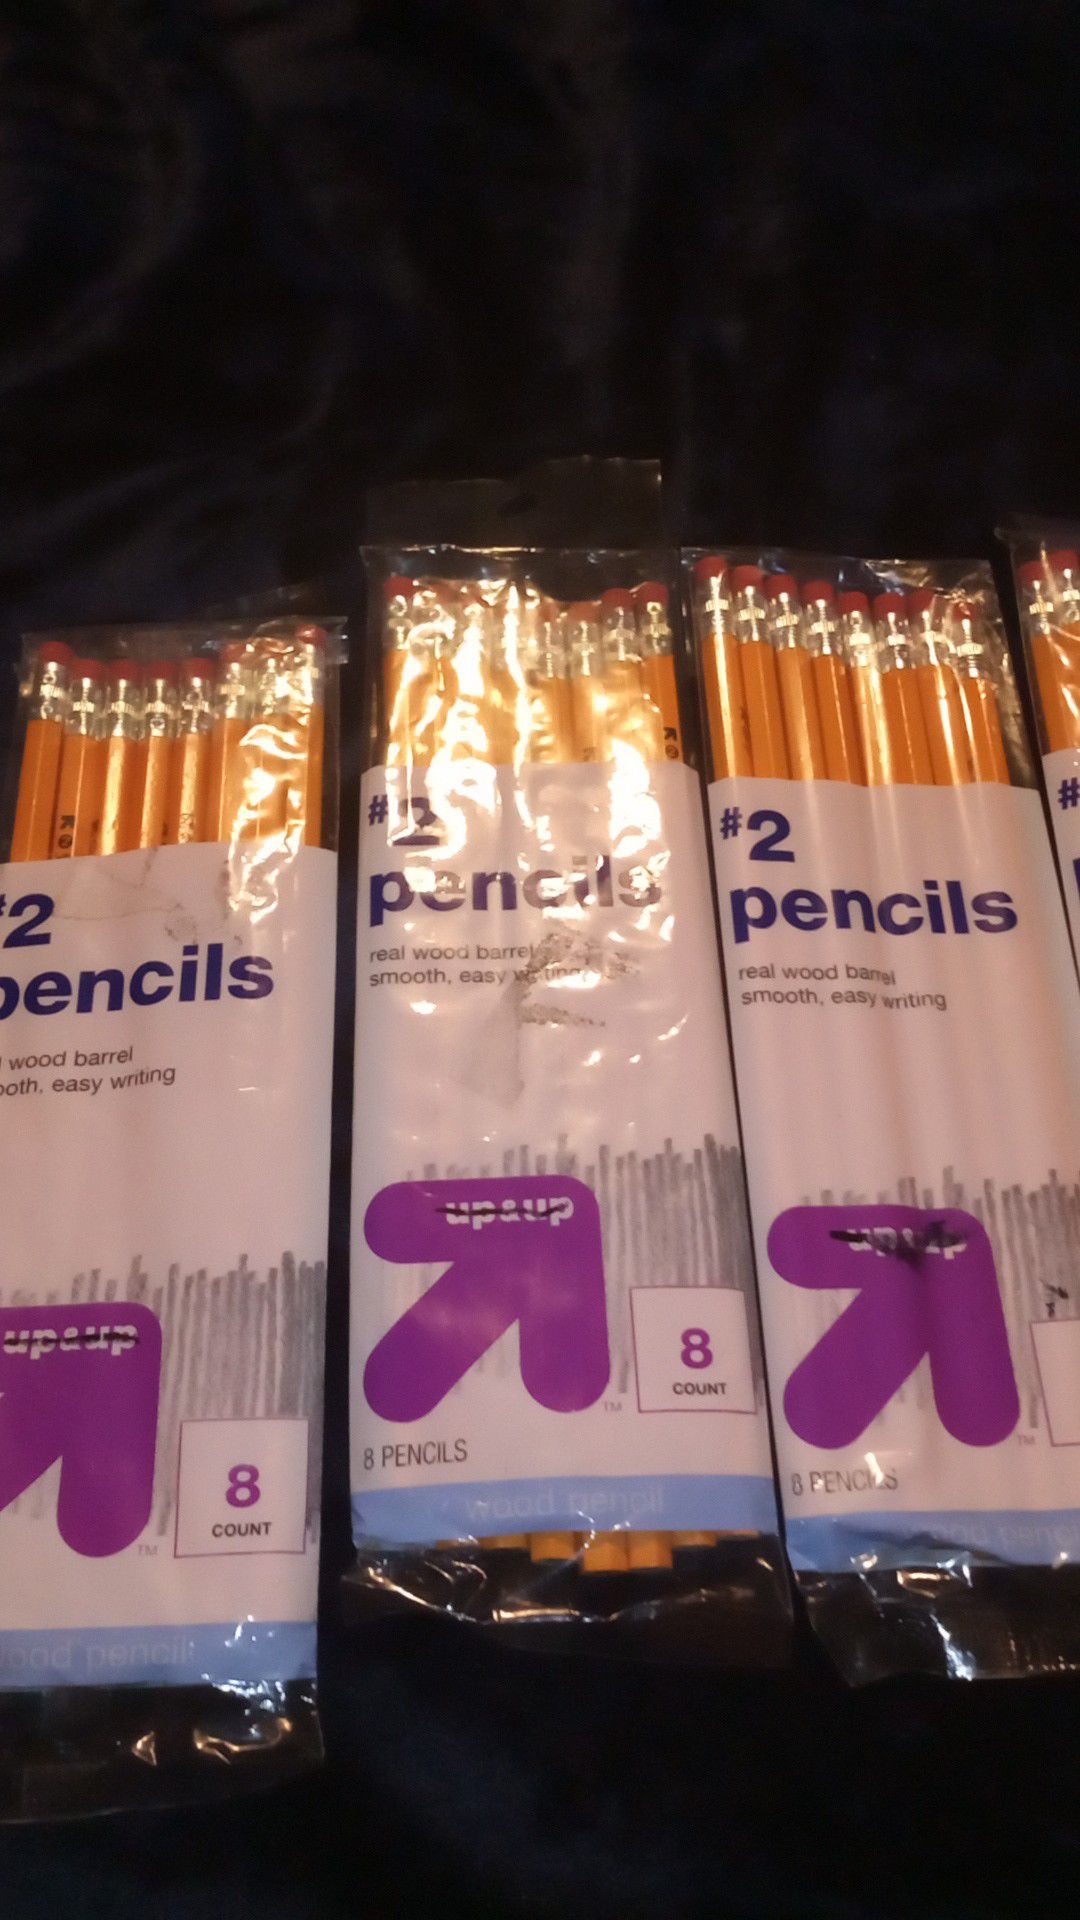 #2 pencils I have four of these